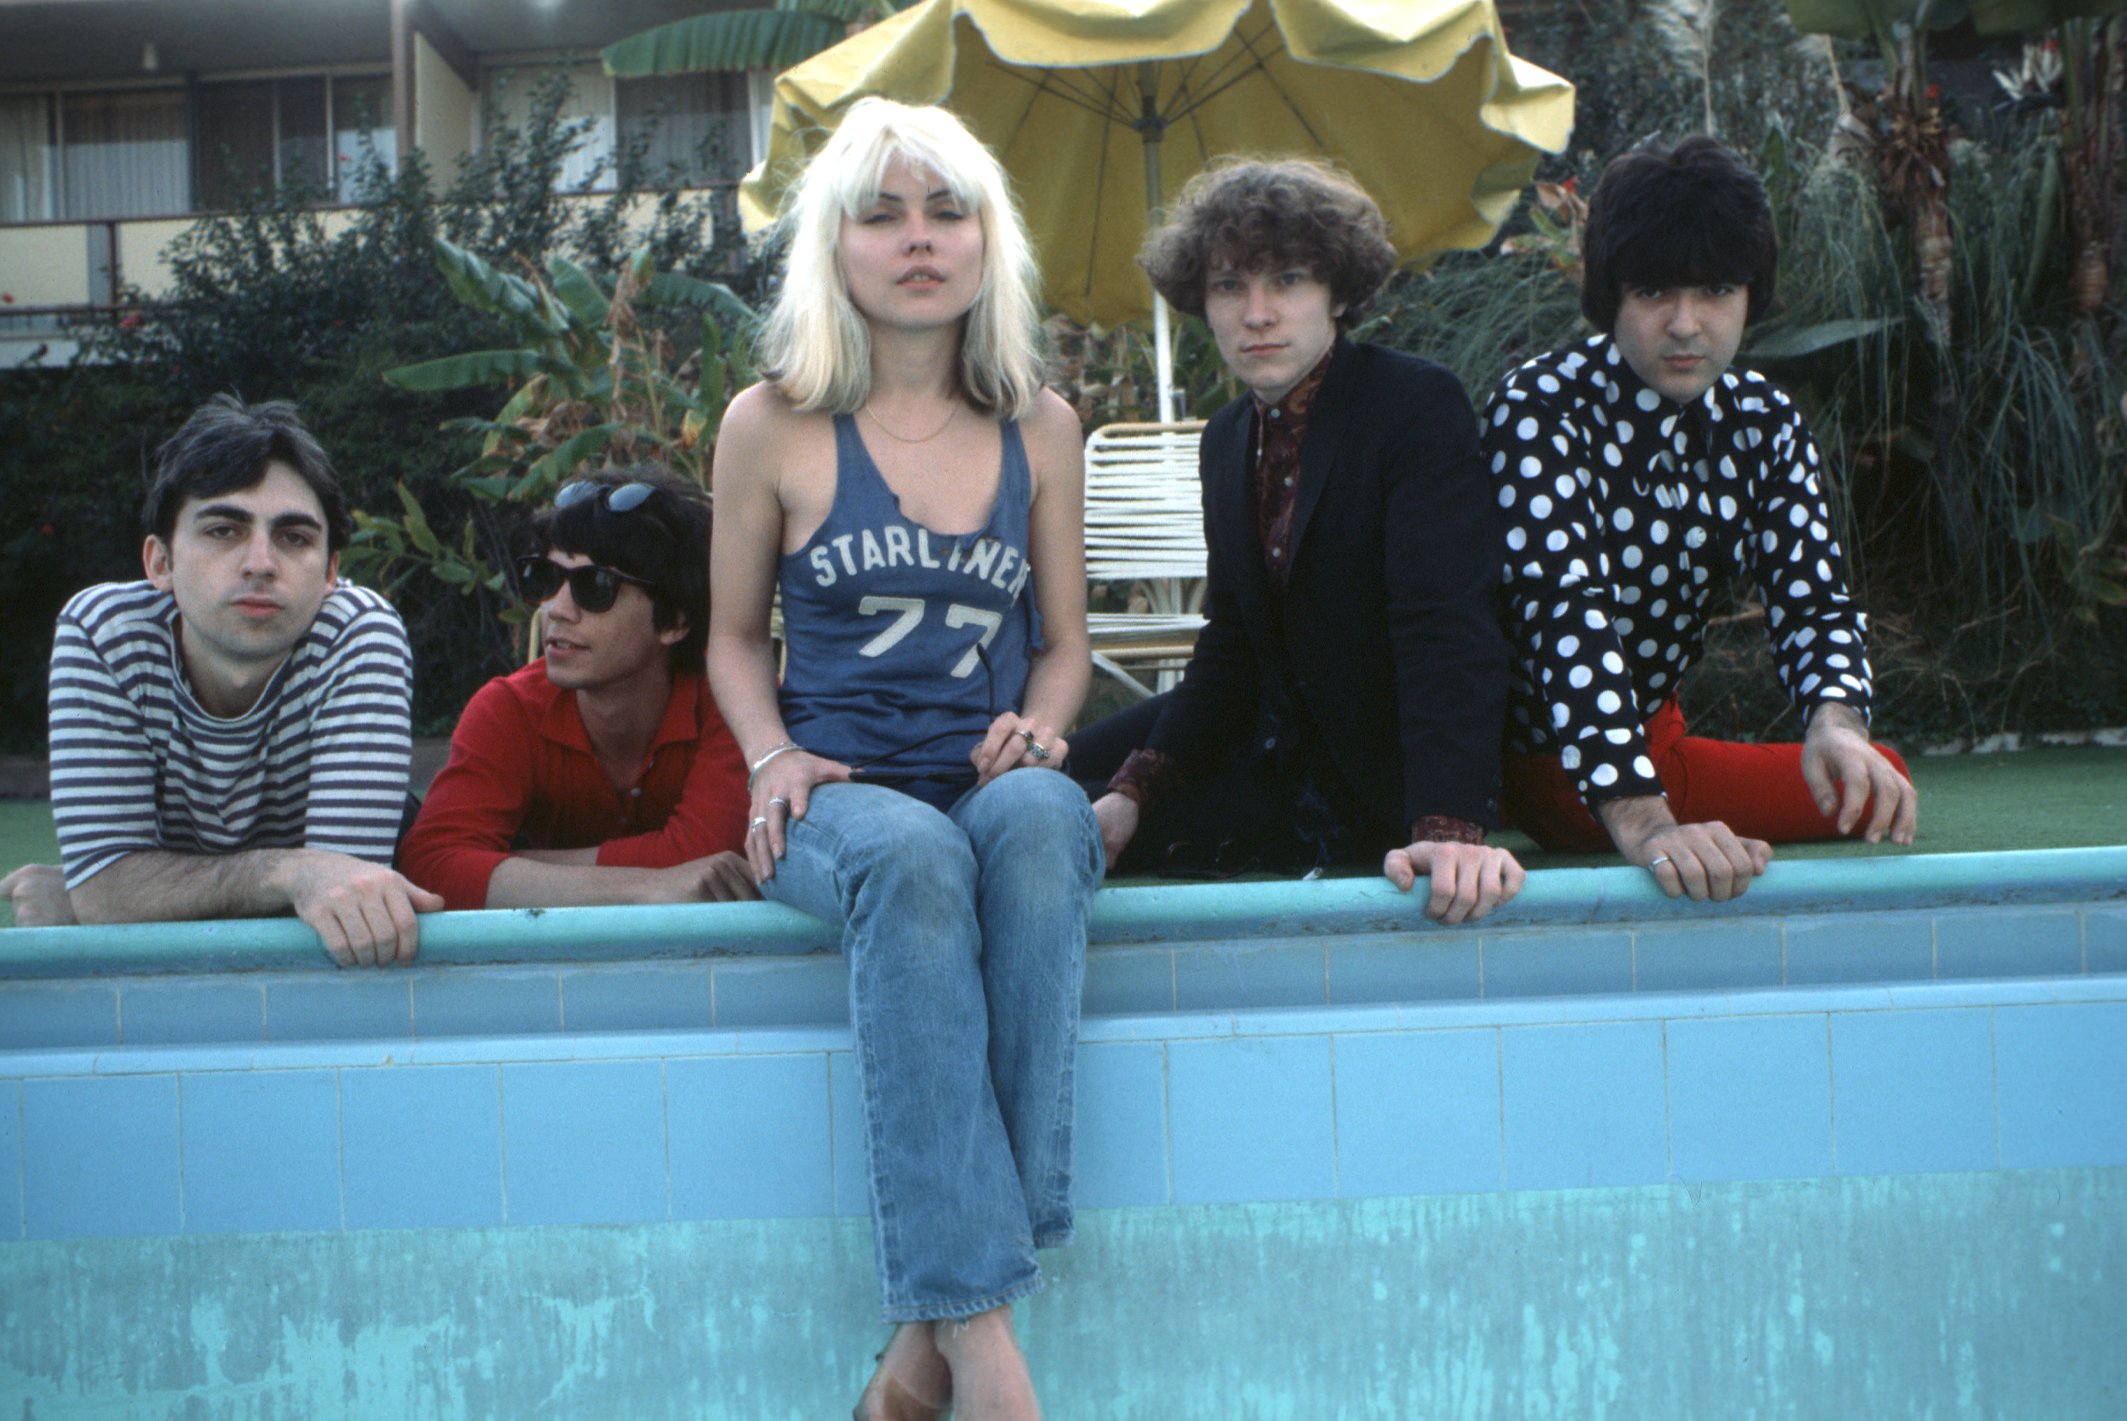 Blondie Member Admits This Hit Was a Rip-Off of ABBA's 'Dancing Queen'